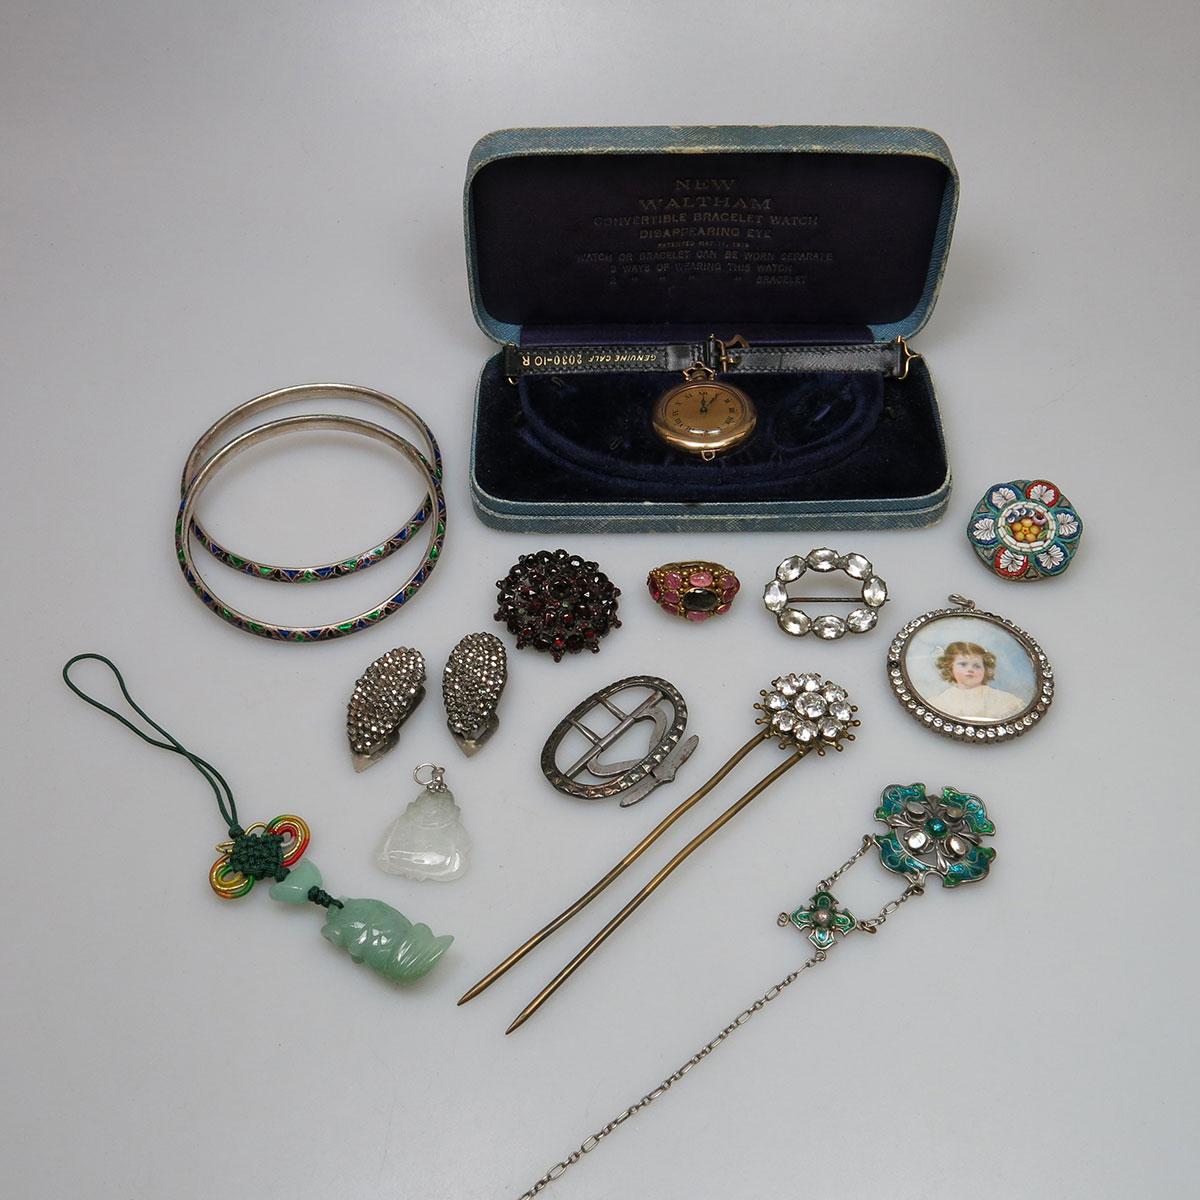 Small Quantity Of Silver, Silver-Plated And Costume Jewellery